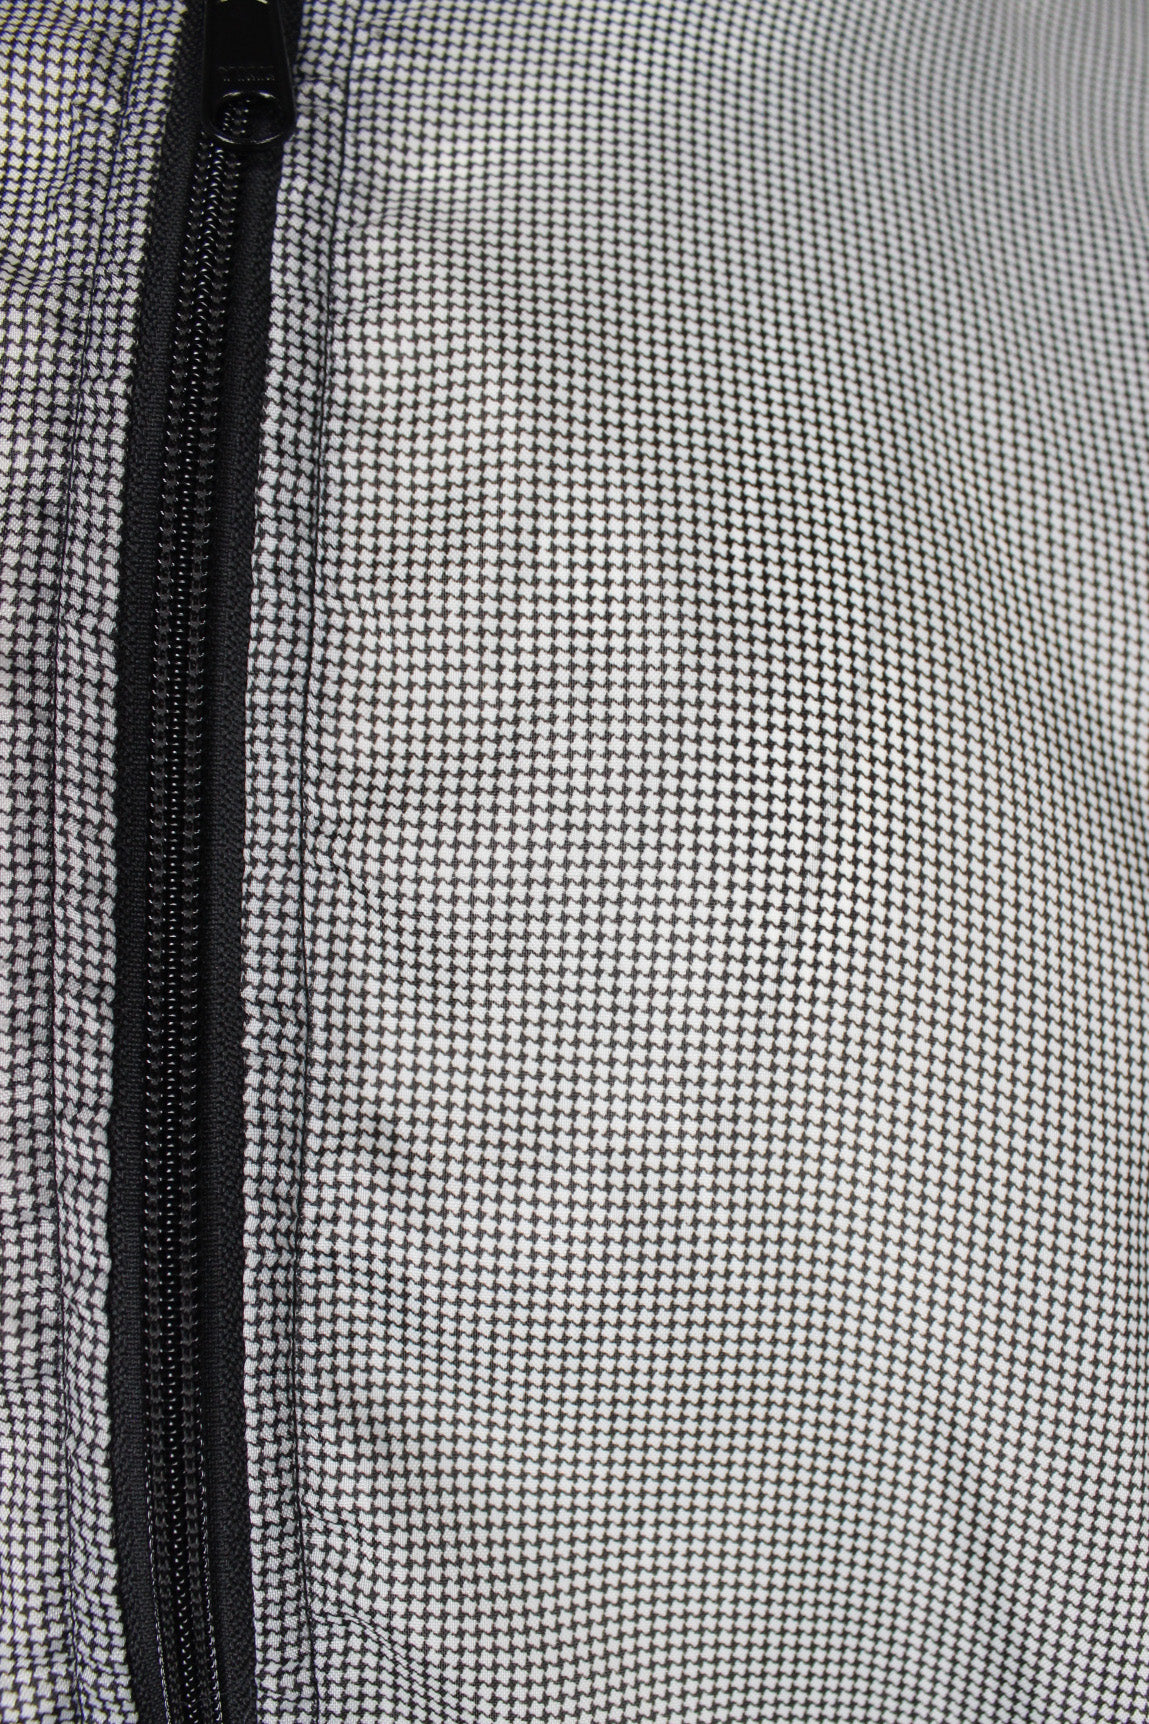 detail view of micro houndstooth pattern.